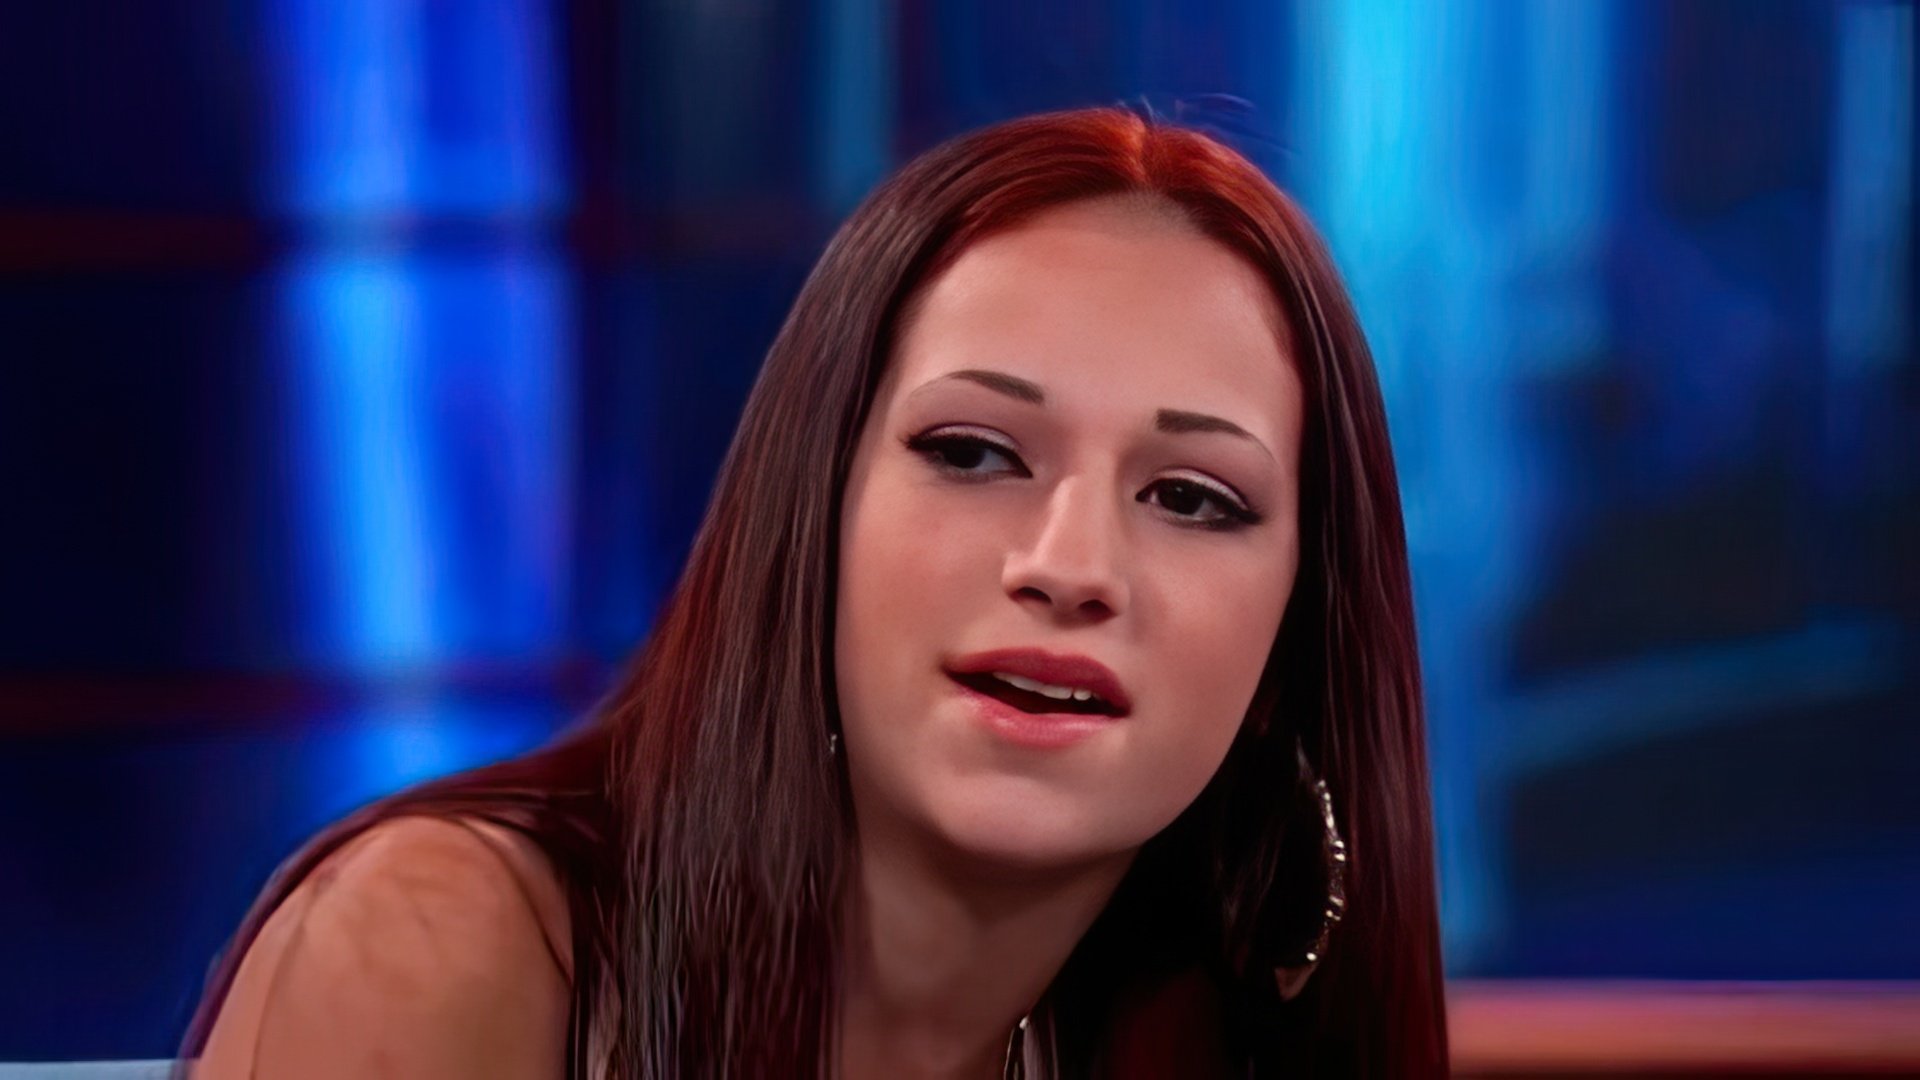 Danielle Bregoli’s Phrase Catch me outside, how about that Became a Meme